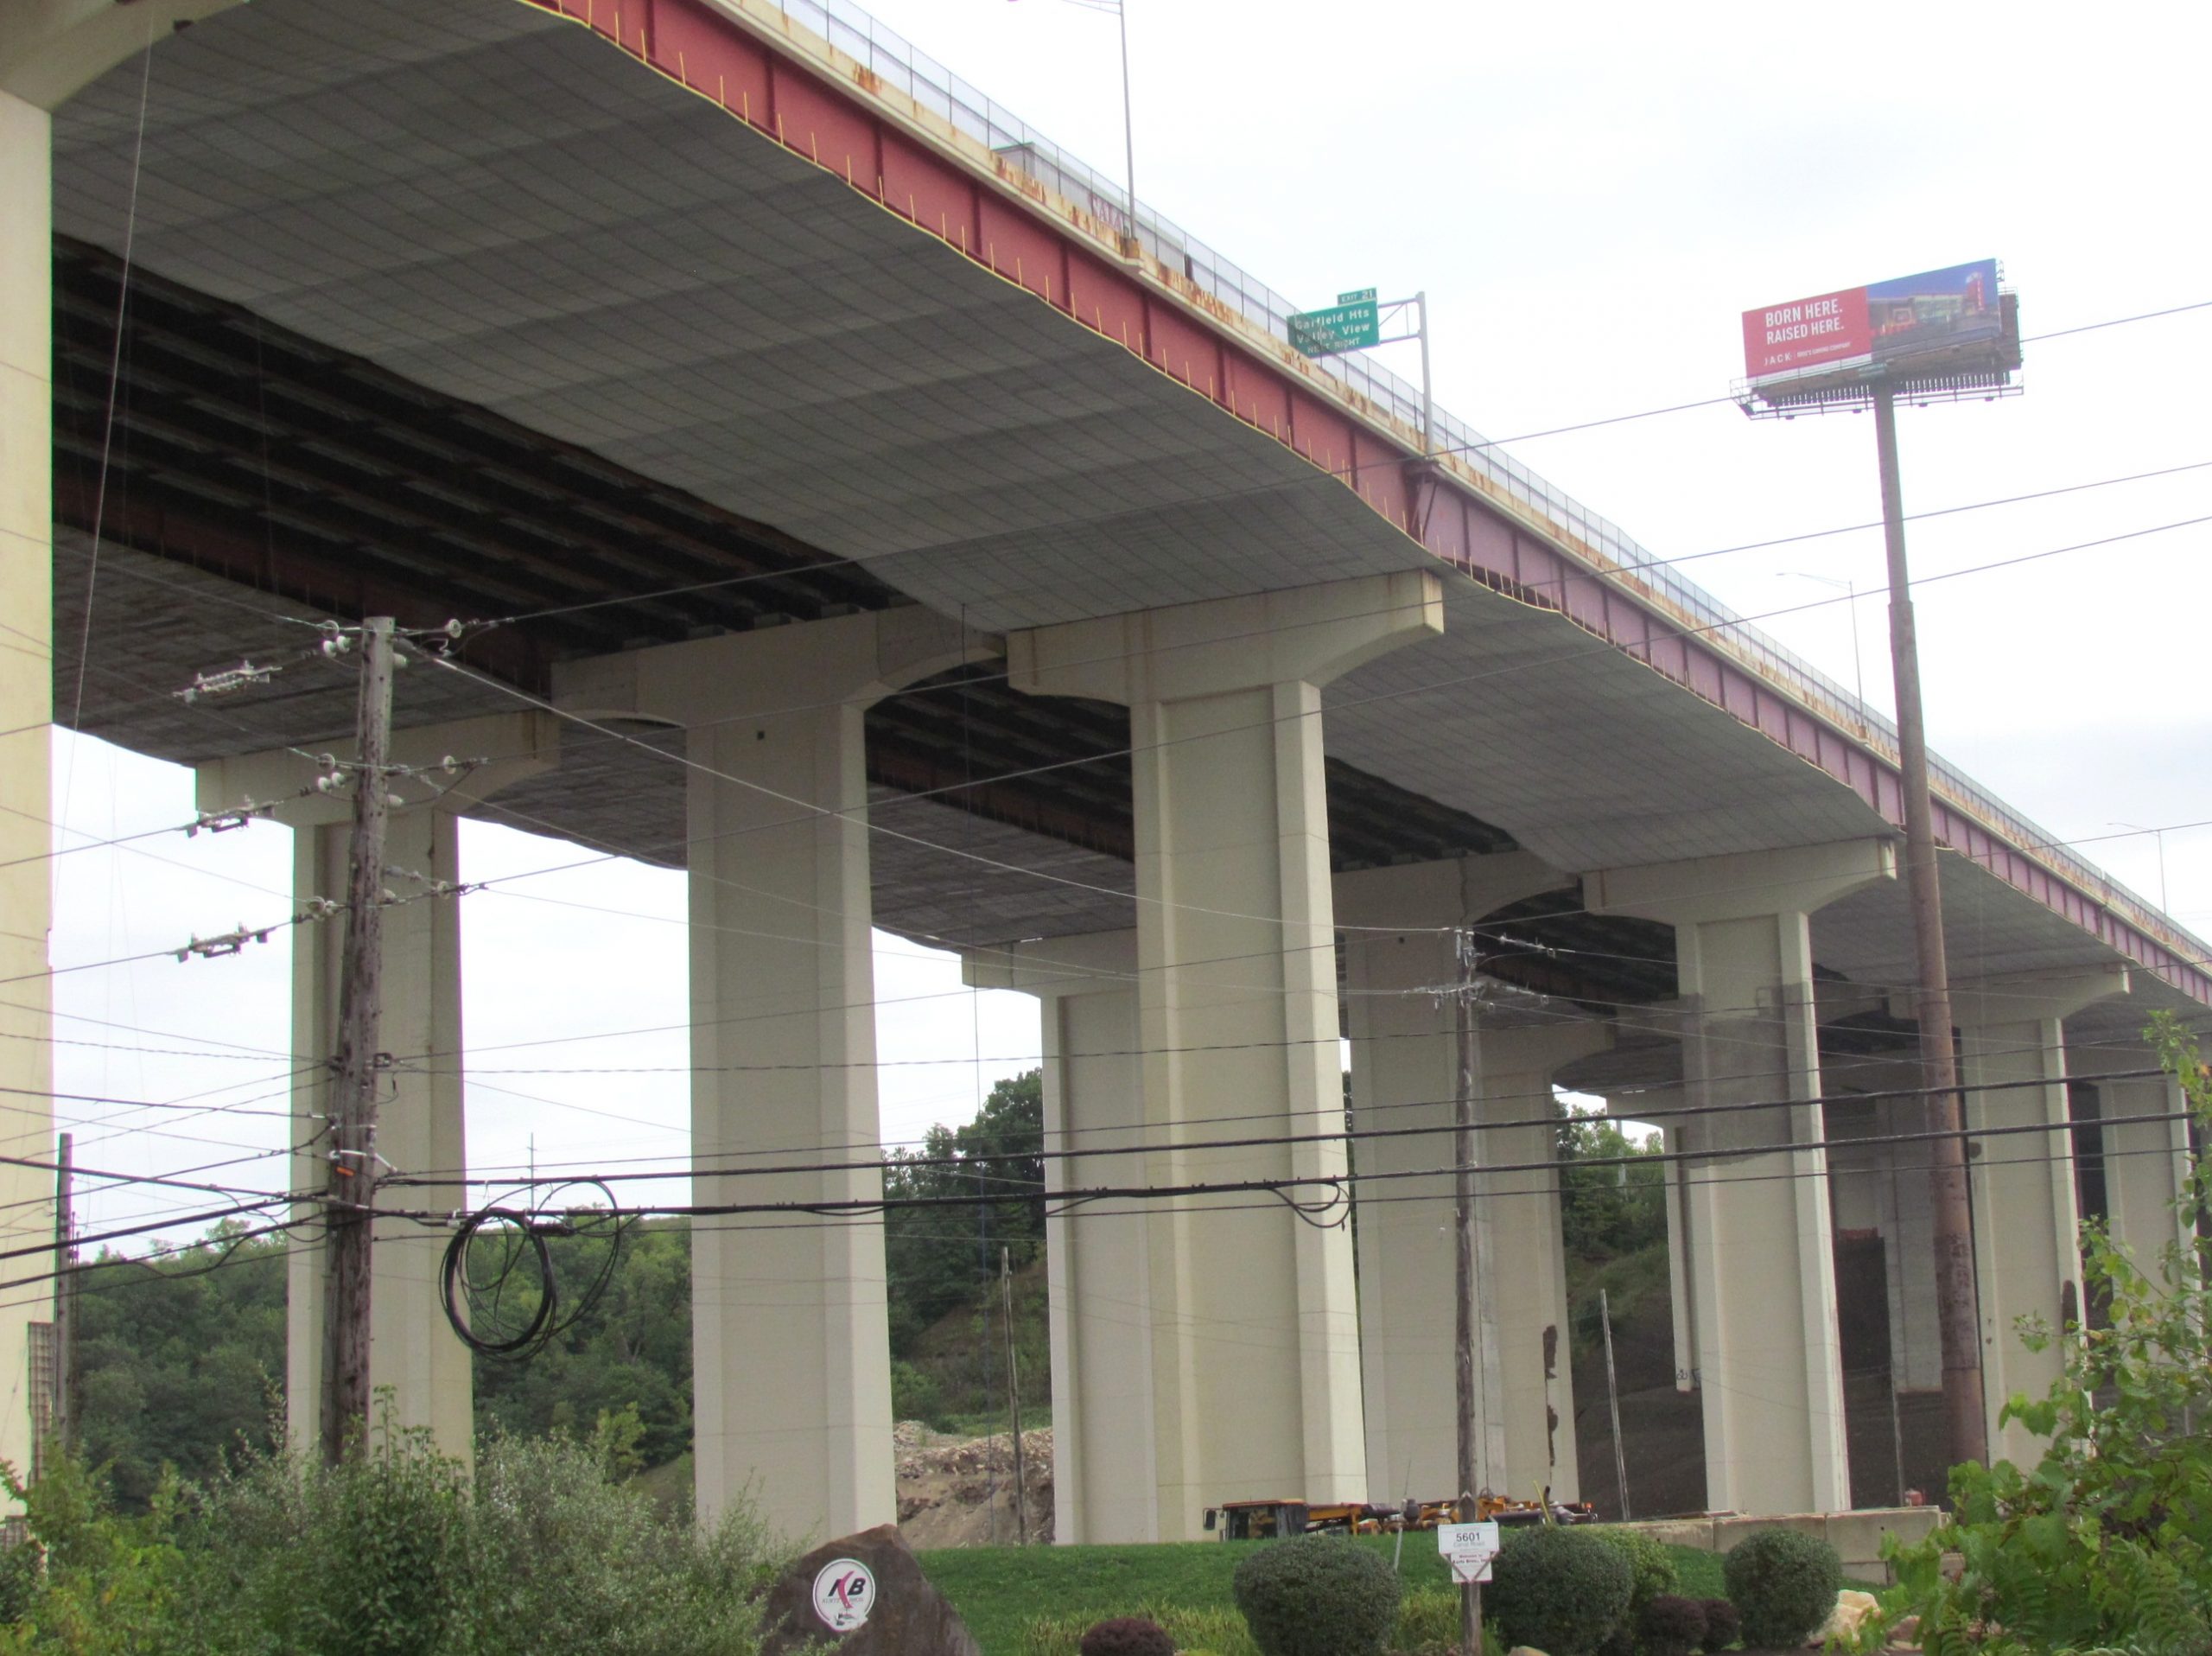 New traffic pattern to start on Valley View Bridge this weekend